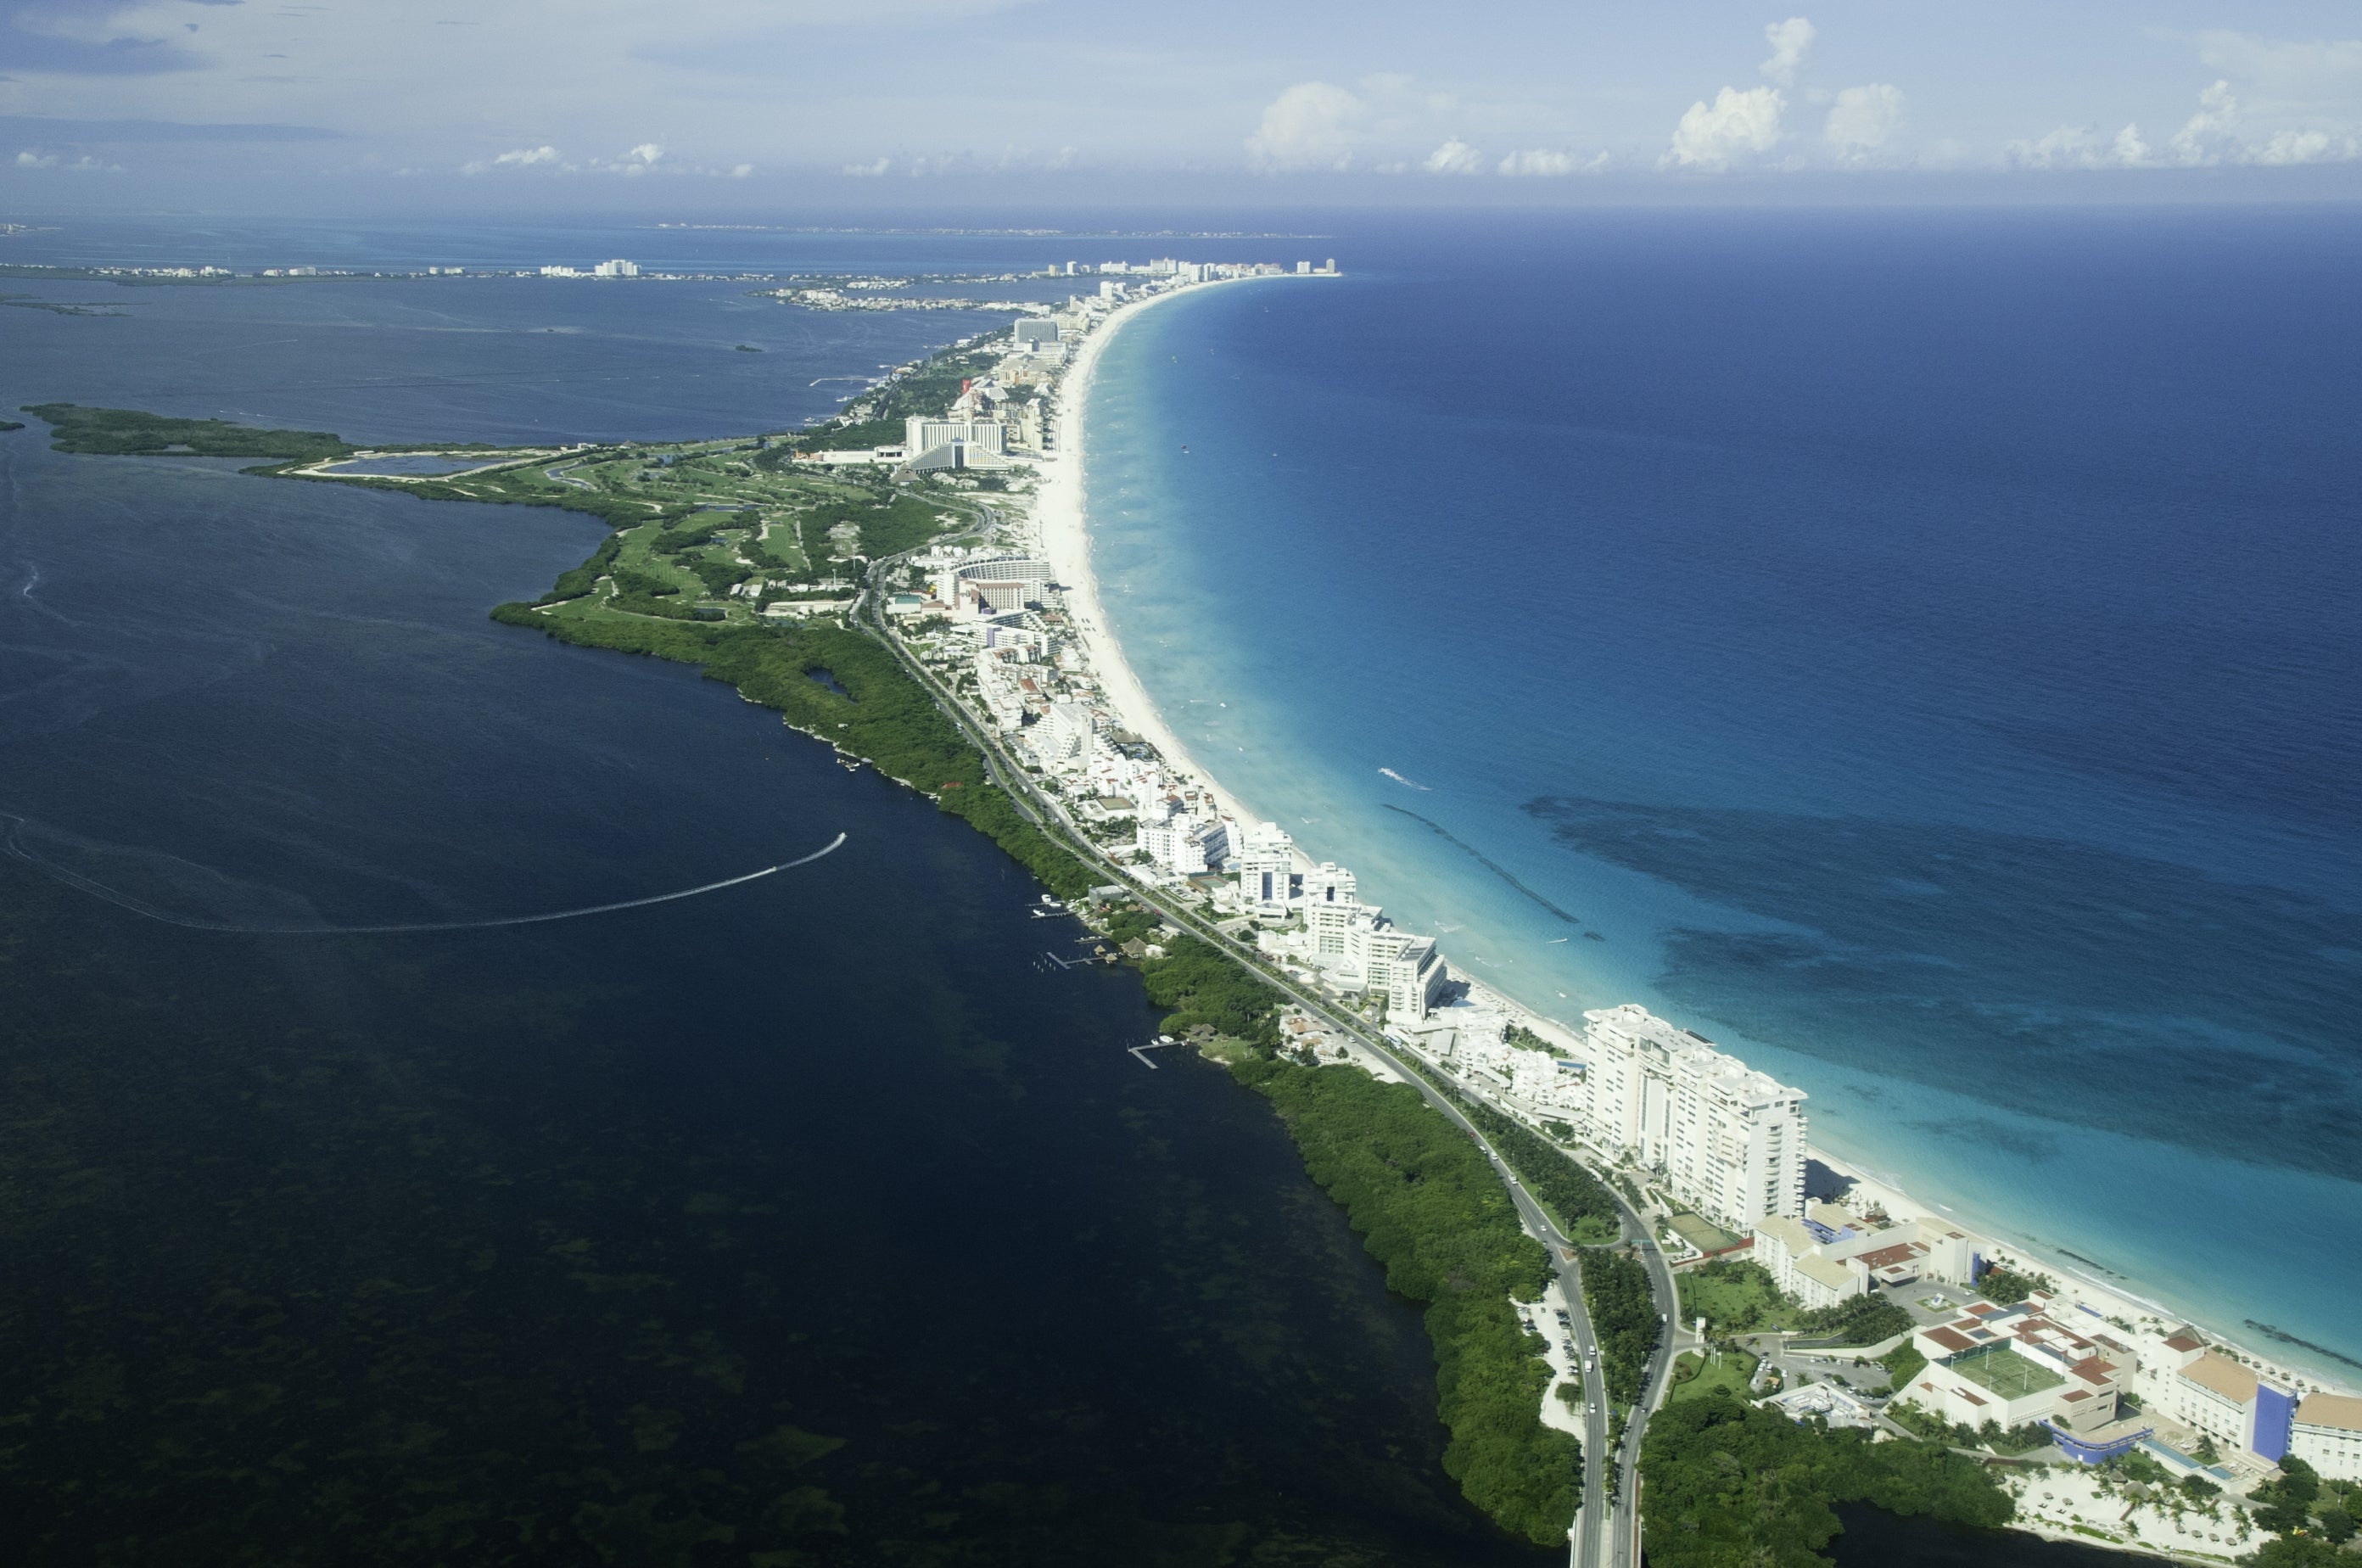 Is it safe to travel to Cancun or other parts of Mexico?